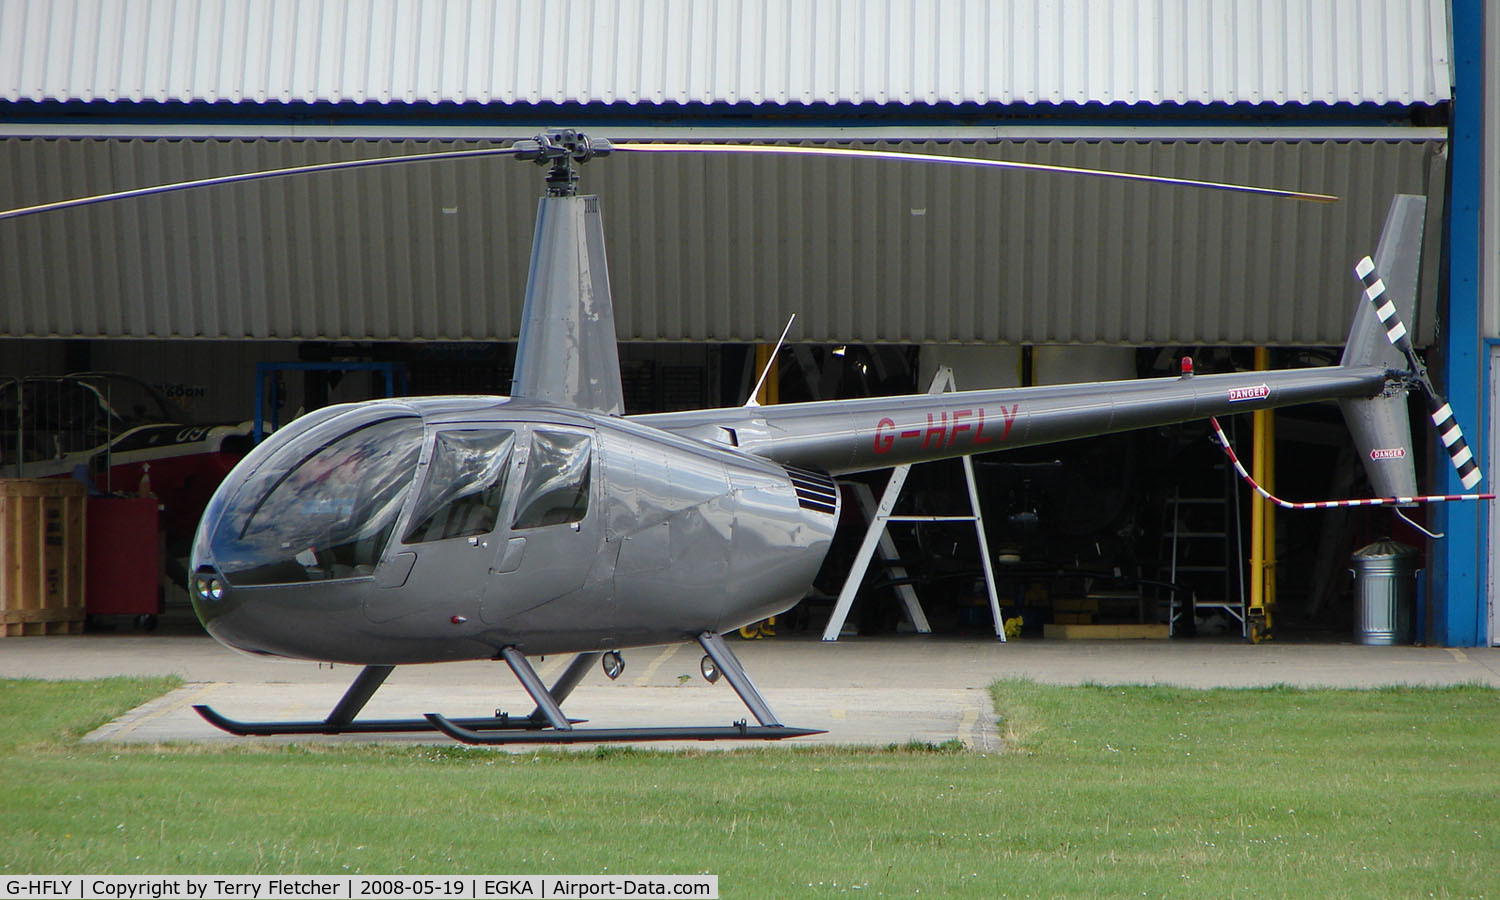 G-HFLY, 2007 Robinson R44  Raven II C/N 11876, A pleasant May evening at Shoreham Airport , Sussex , UK